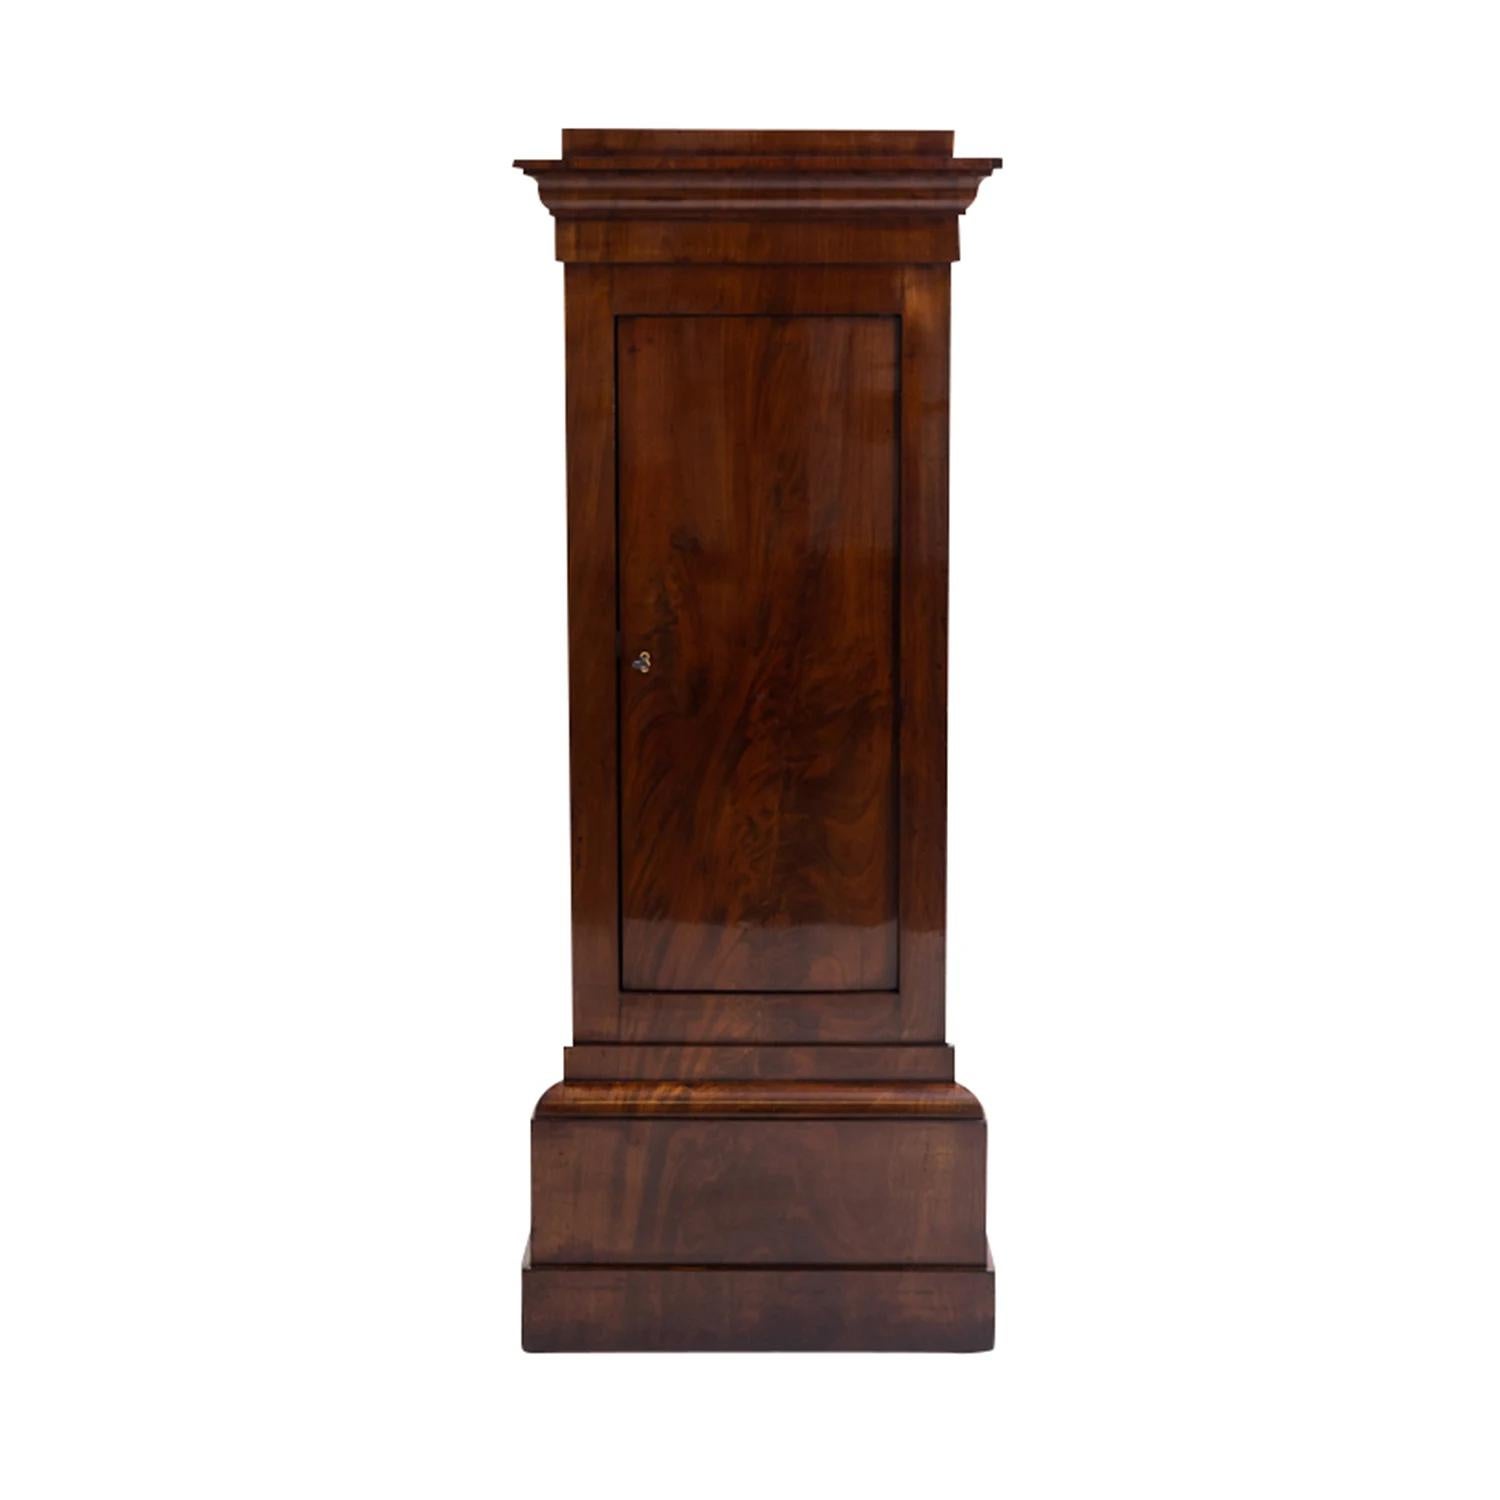 A dark-brown, antique German early Biedermeier pair of pedestals made of hand shellac polished Mahogany, in very good condition. Each of the detailed podiums are composed with three shelving, consisting its original brass hardware and keys,